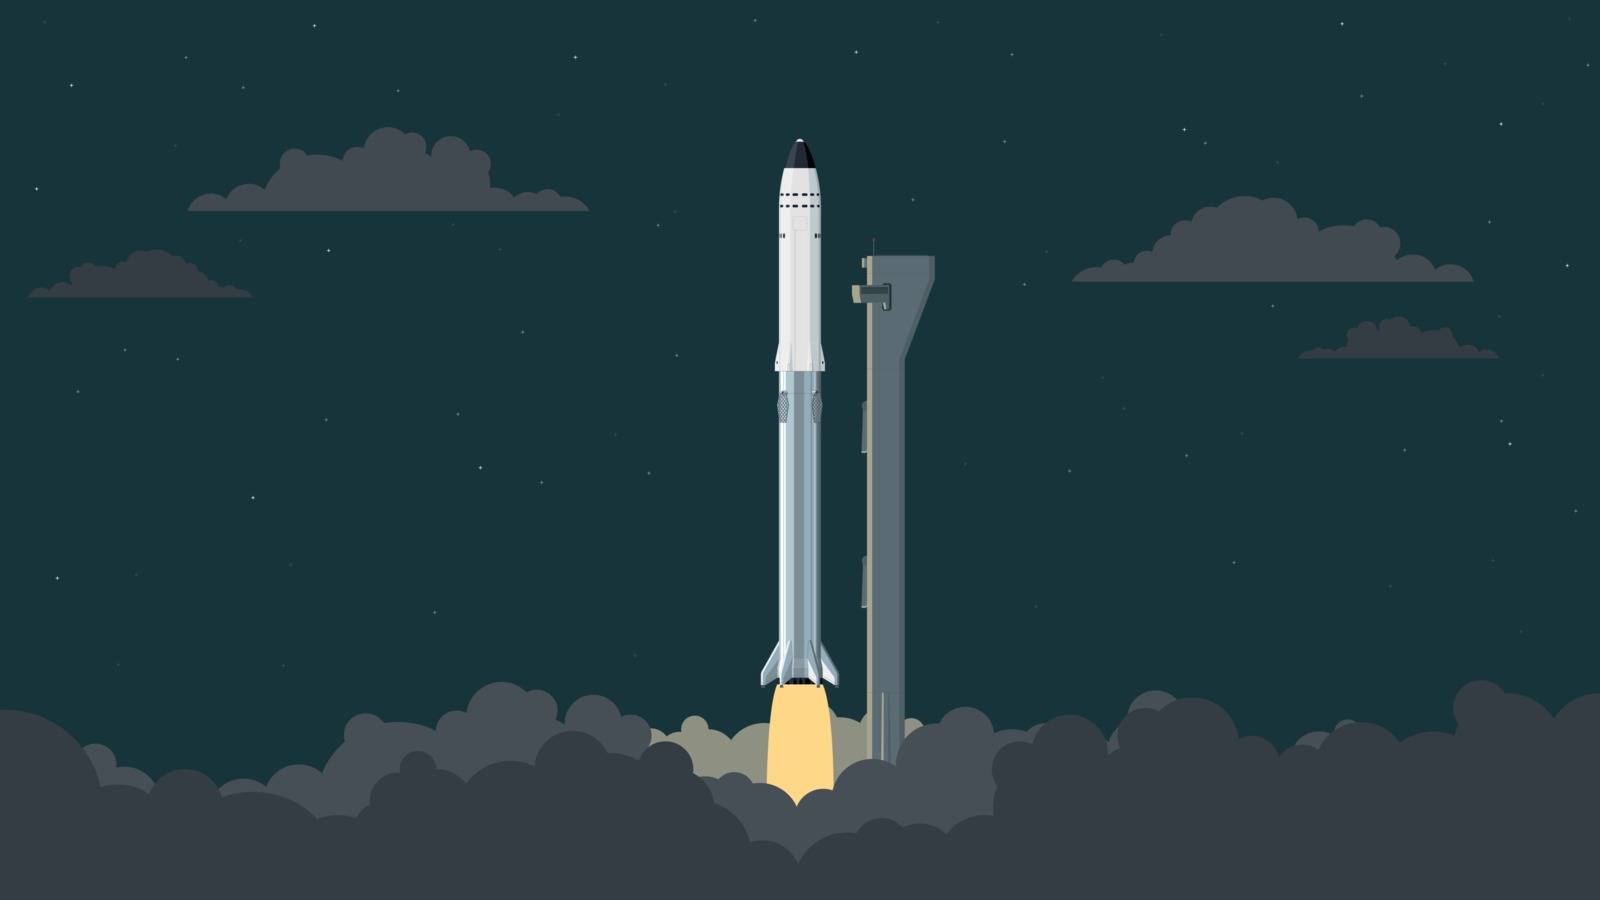 May 1, 2020: Detailed flat vector illustration of the launching of SpaceX Lunar Optimized Starship at night.